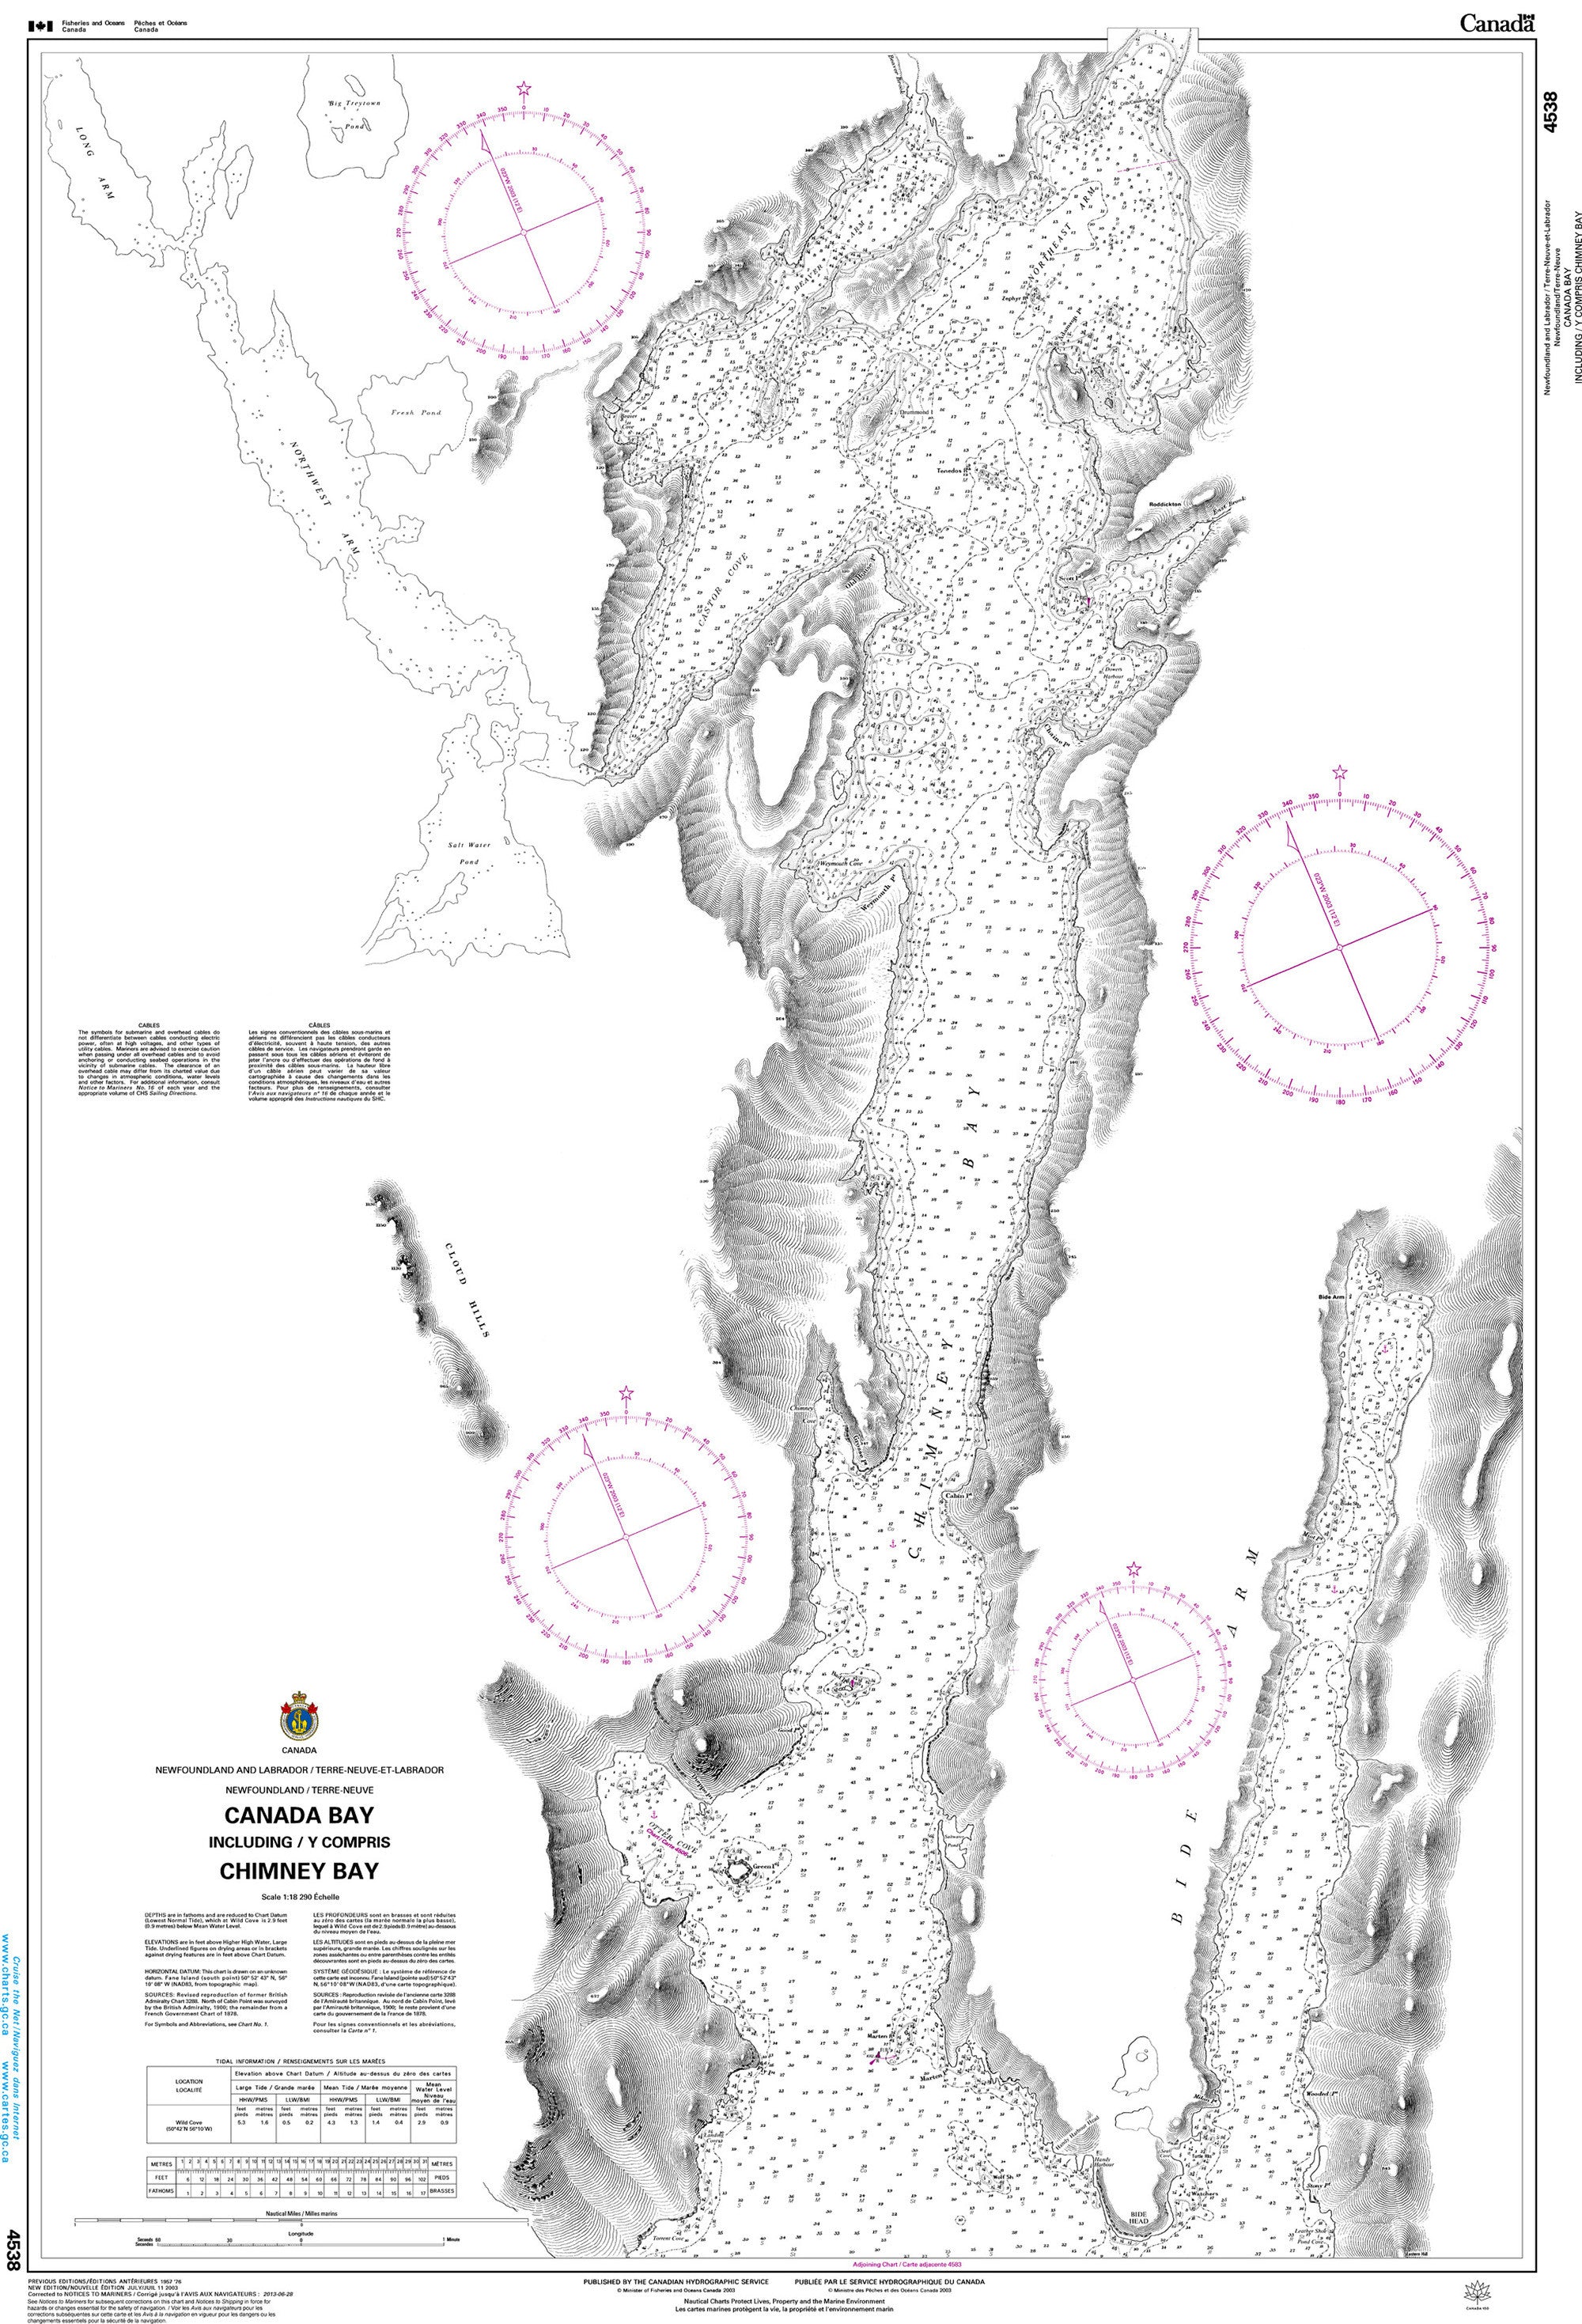 Canadian Hydrographic Service Nautical Chart CHS4538: Canada Bay including / y compris Chimney Bay